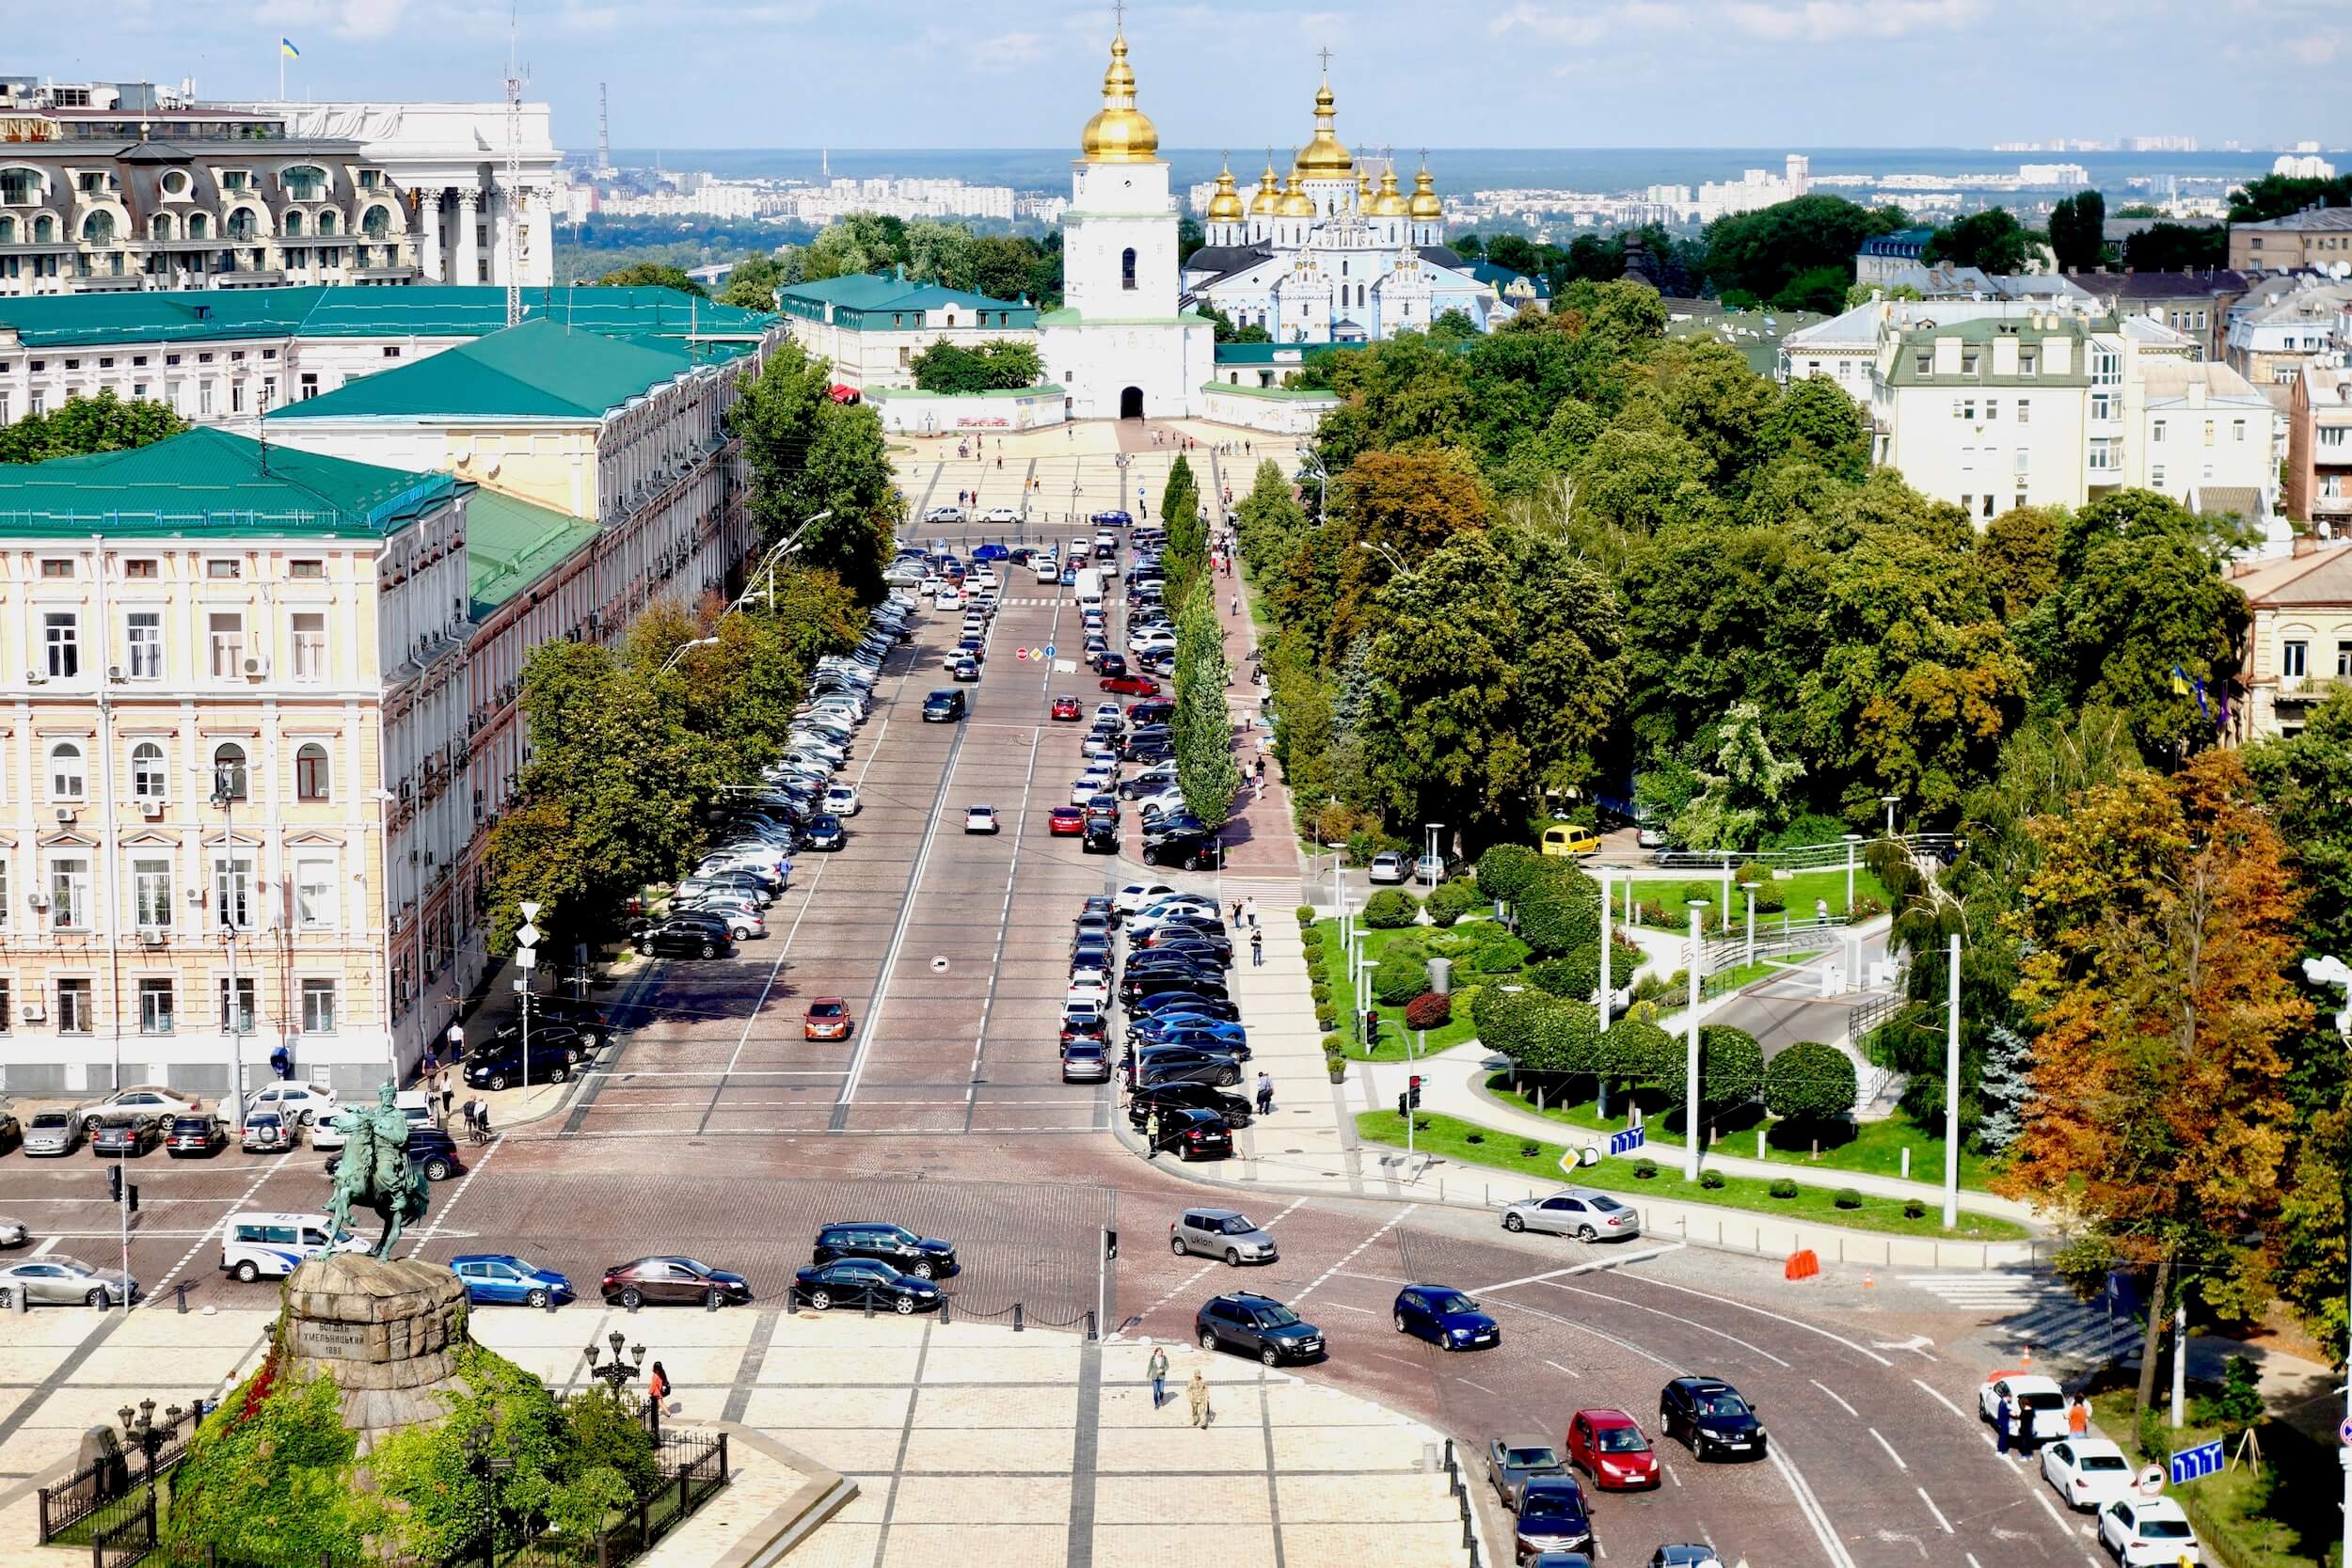 A stately boulevard leads to the golden domes of St. Michael's Monastery as taken from the top of the bell tower at St. Sofia's Cathedral.